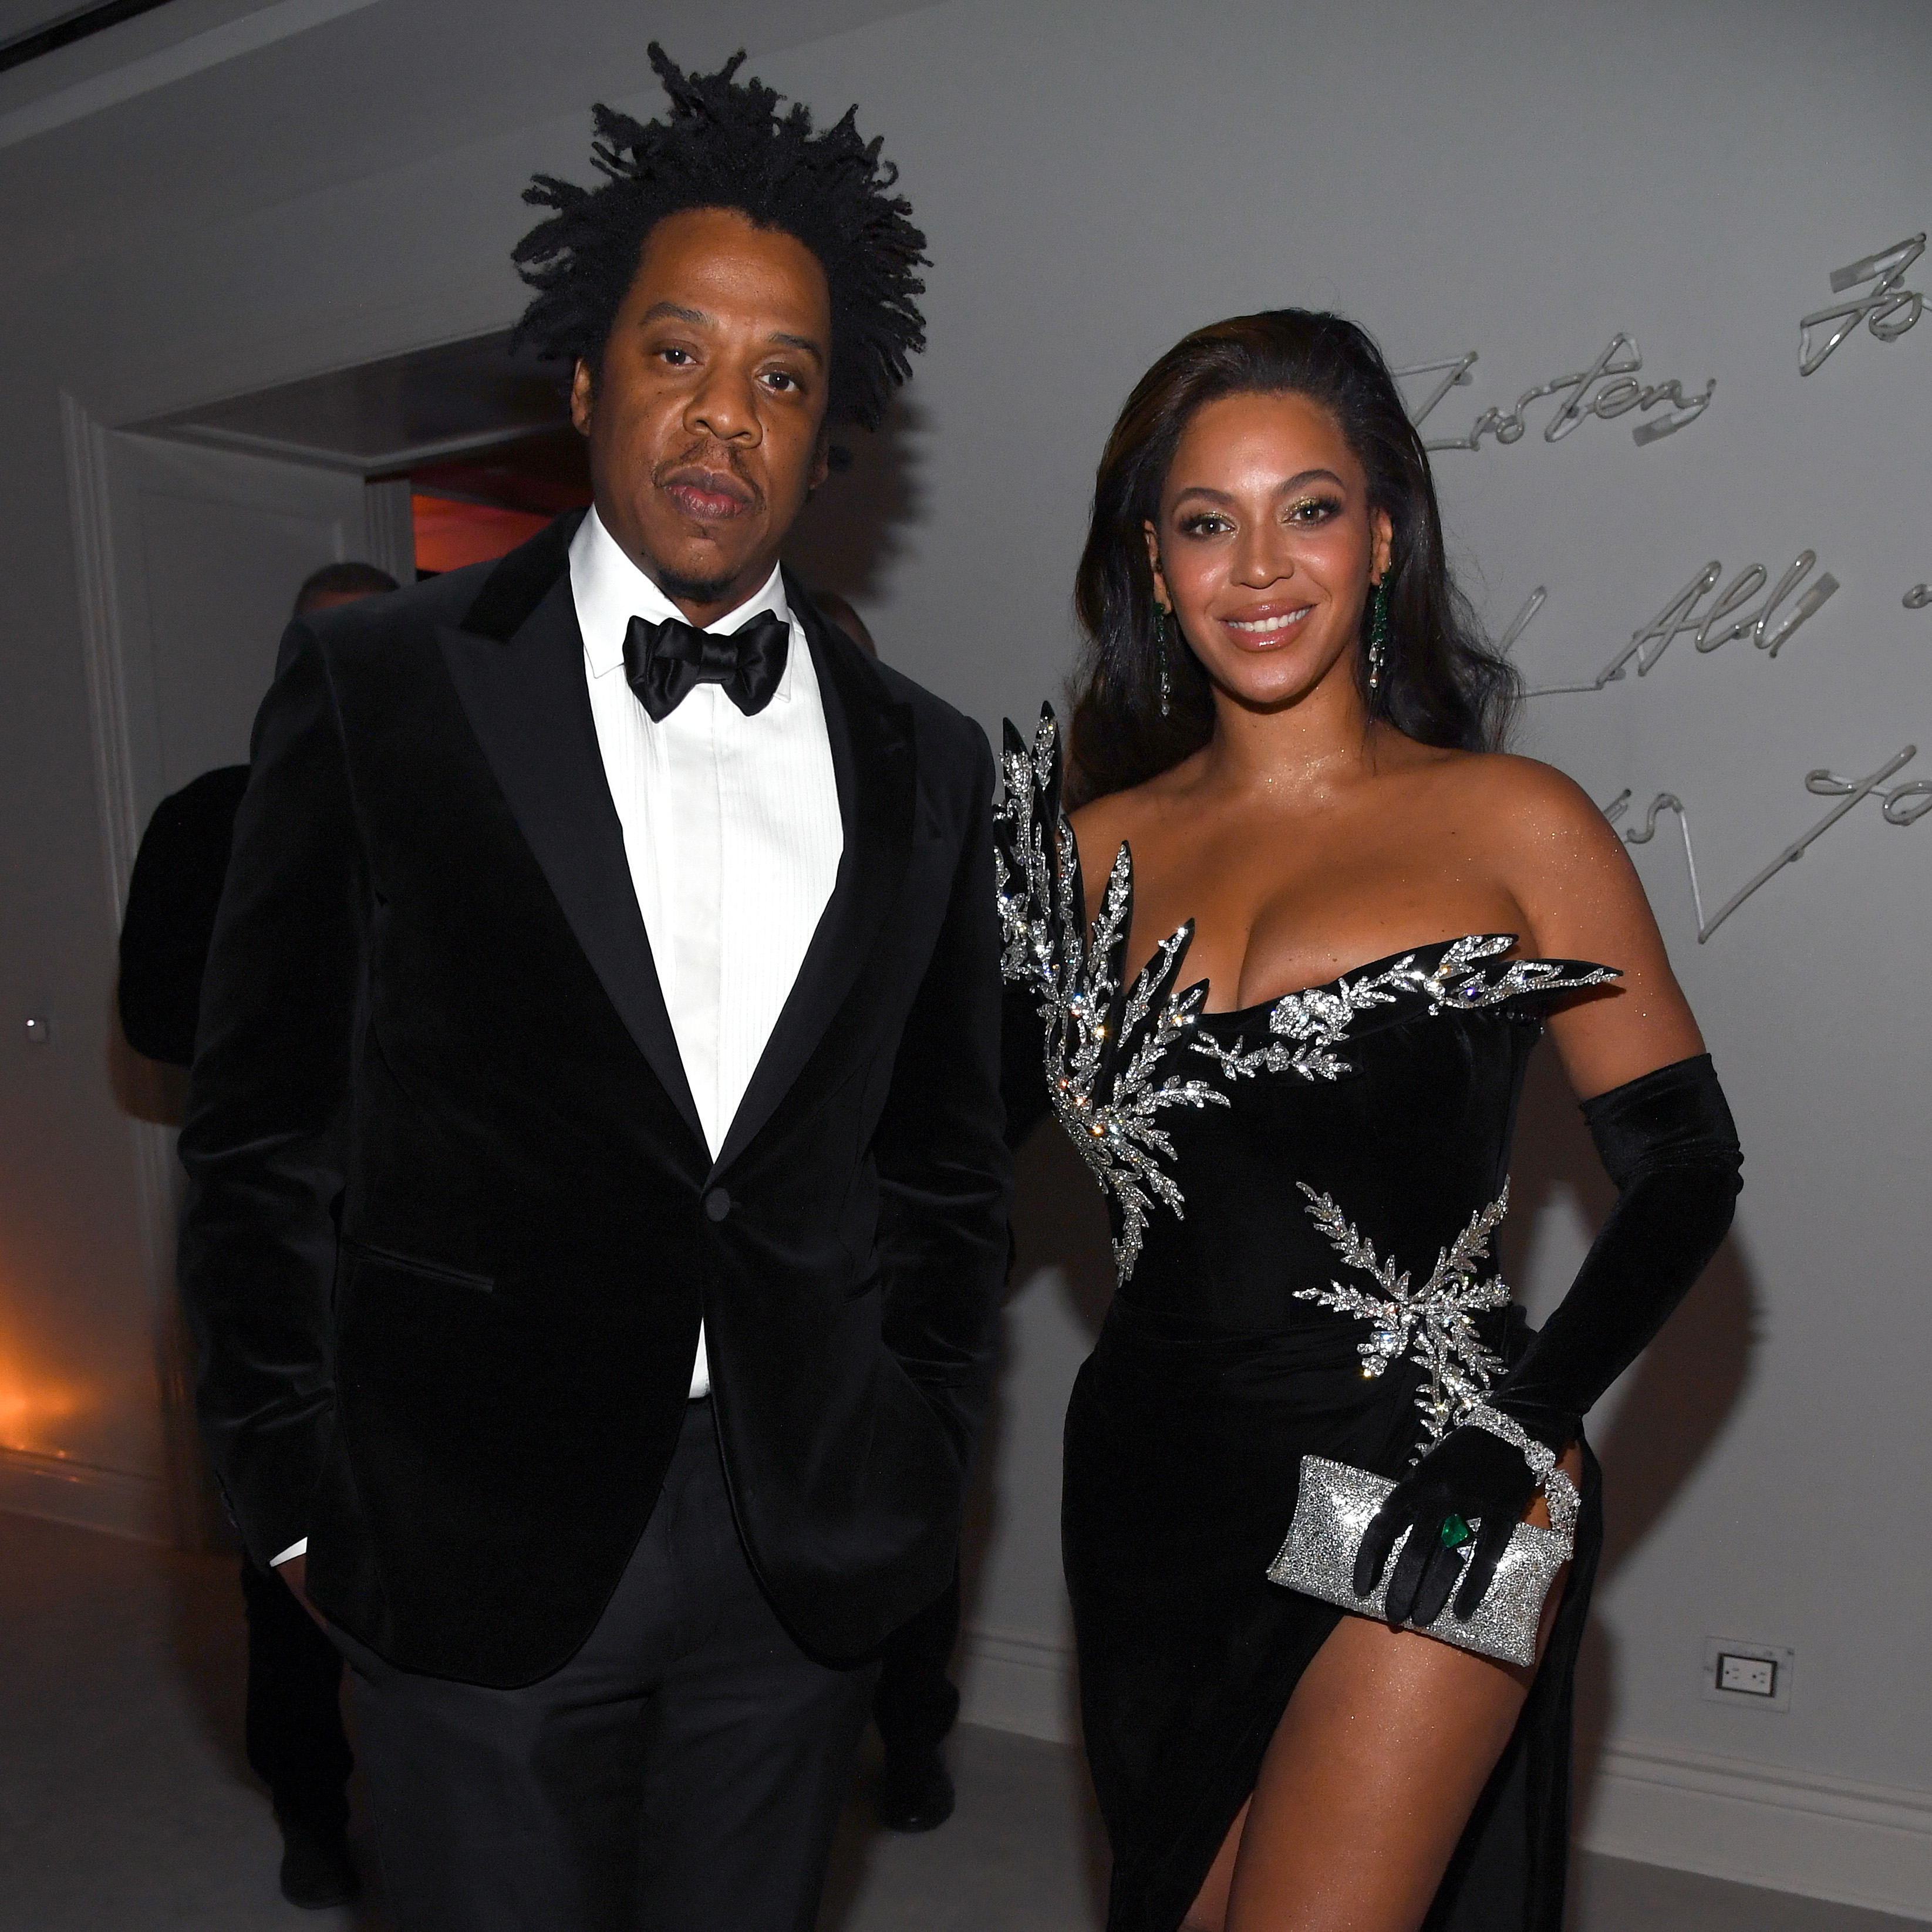 Beyoncé & Jay-Z Star In Tiffany’s Campaign Featuring Basquiat Painting: Twitter Reacts